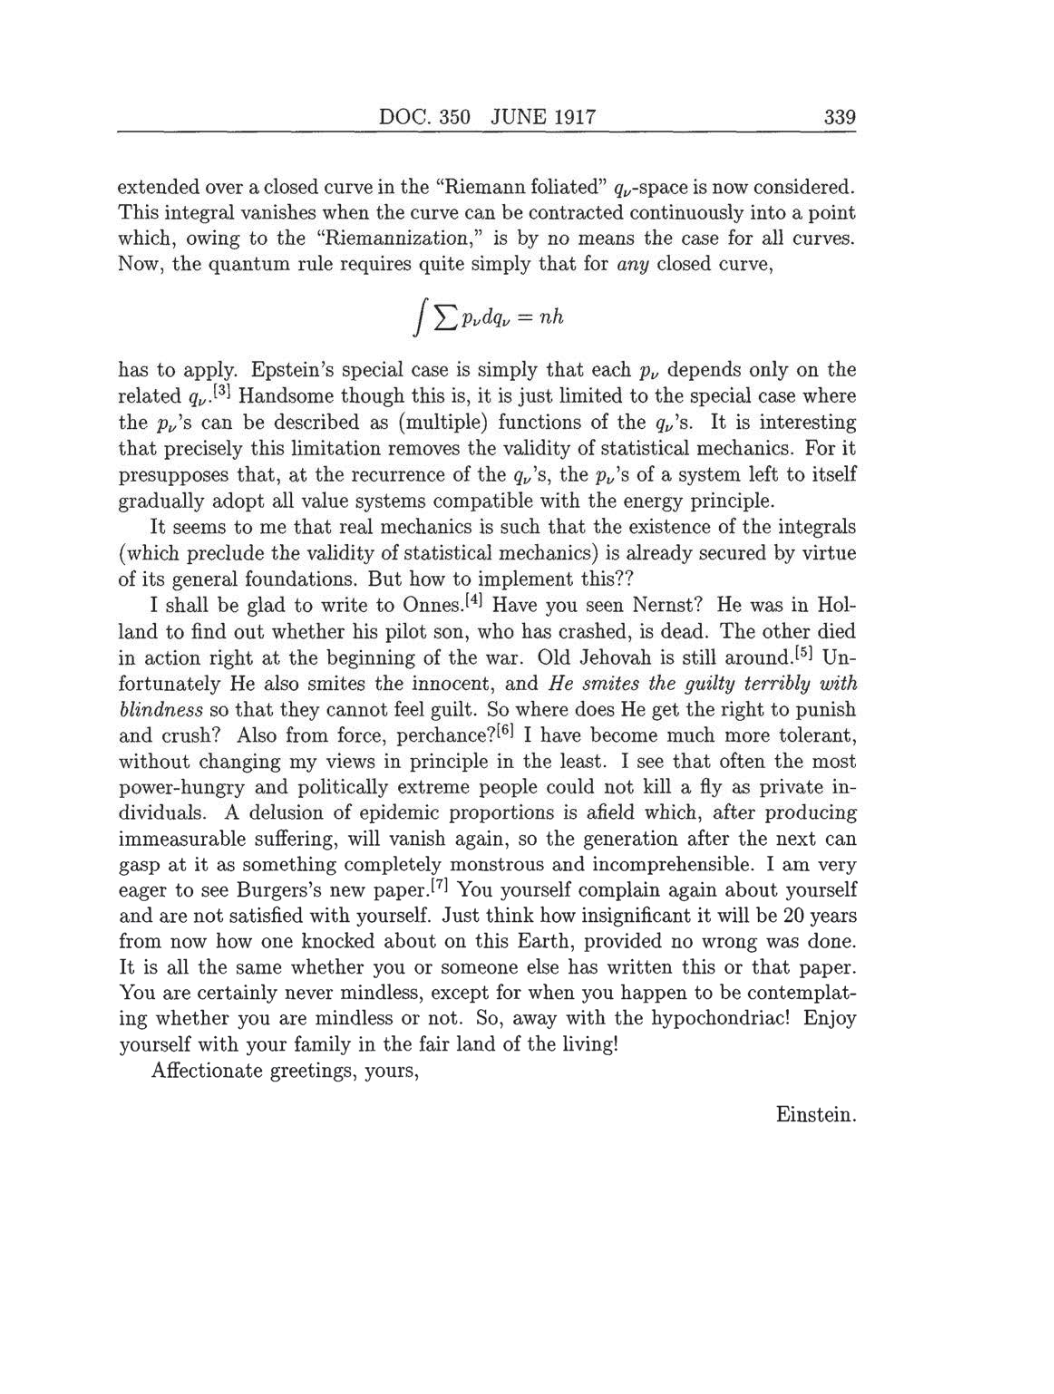 Volume 8: The Berlin Years: Correspondence, 1914-1918 (English translation supplement) page 339